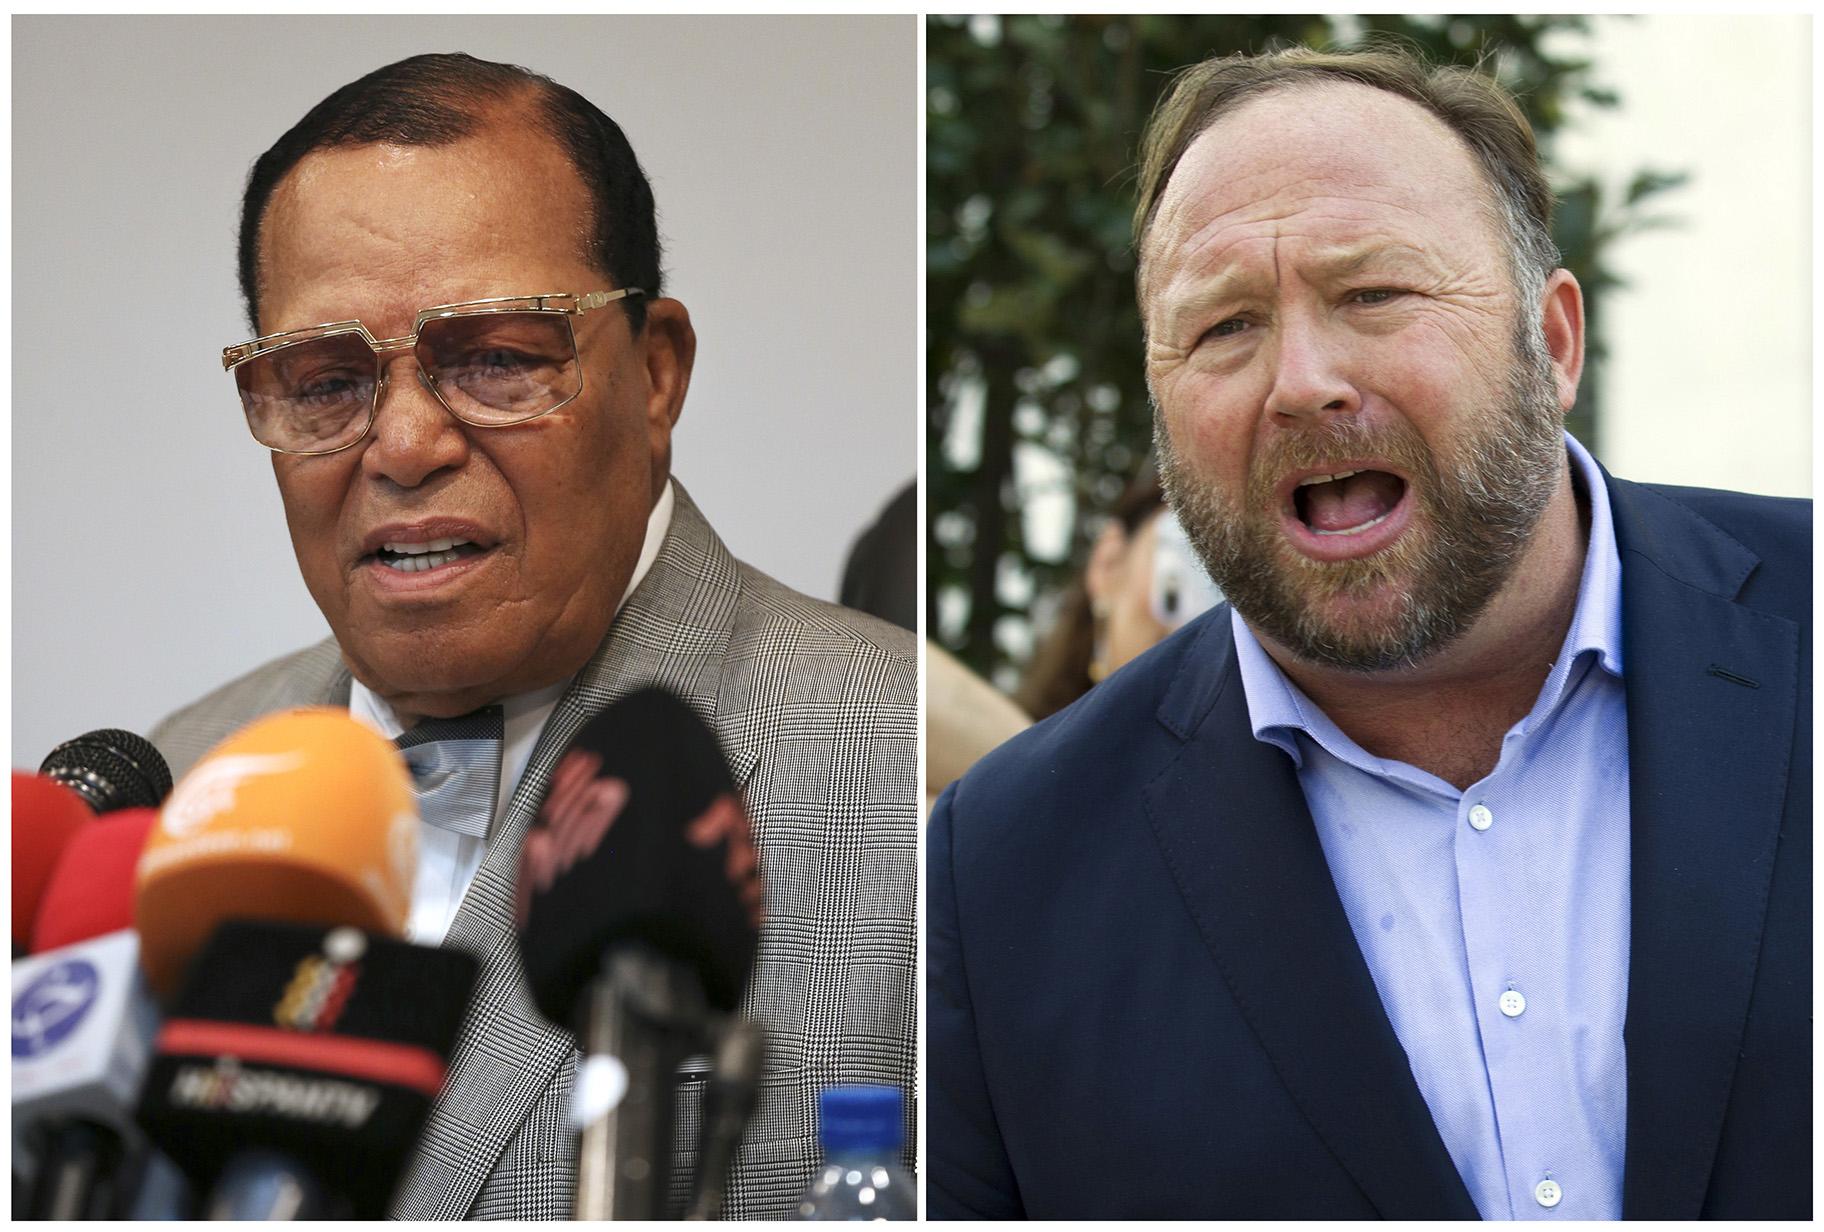 This combination of file photo shows minister Louis Farrakhan, the leader of the Nation of Islam, in Tehran, Iran, on Nov. 8, 2018, left, and conspiracy theorist Alex Jones in Washington on Sept. 5, 2018, right. (AP Photo)